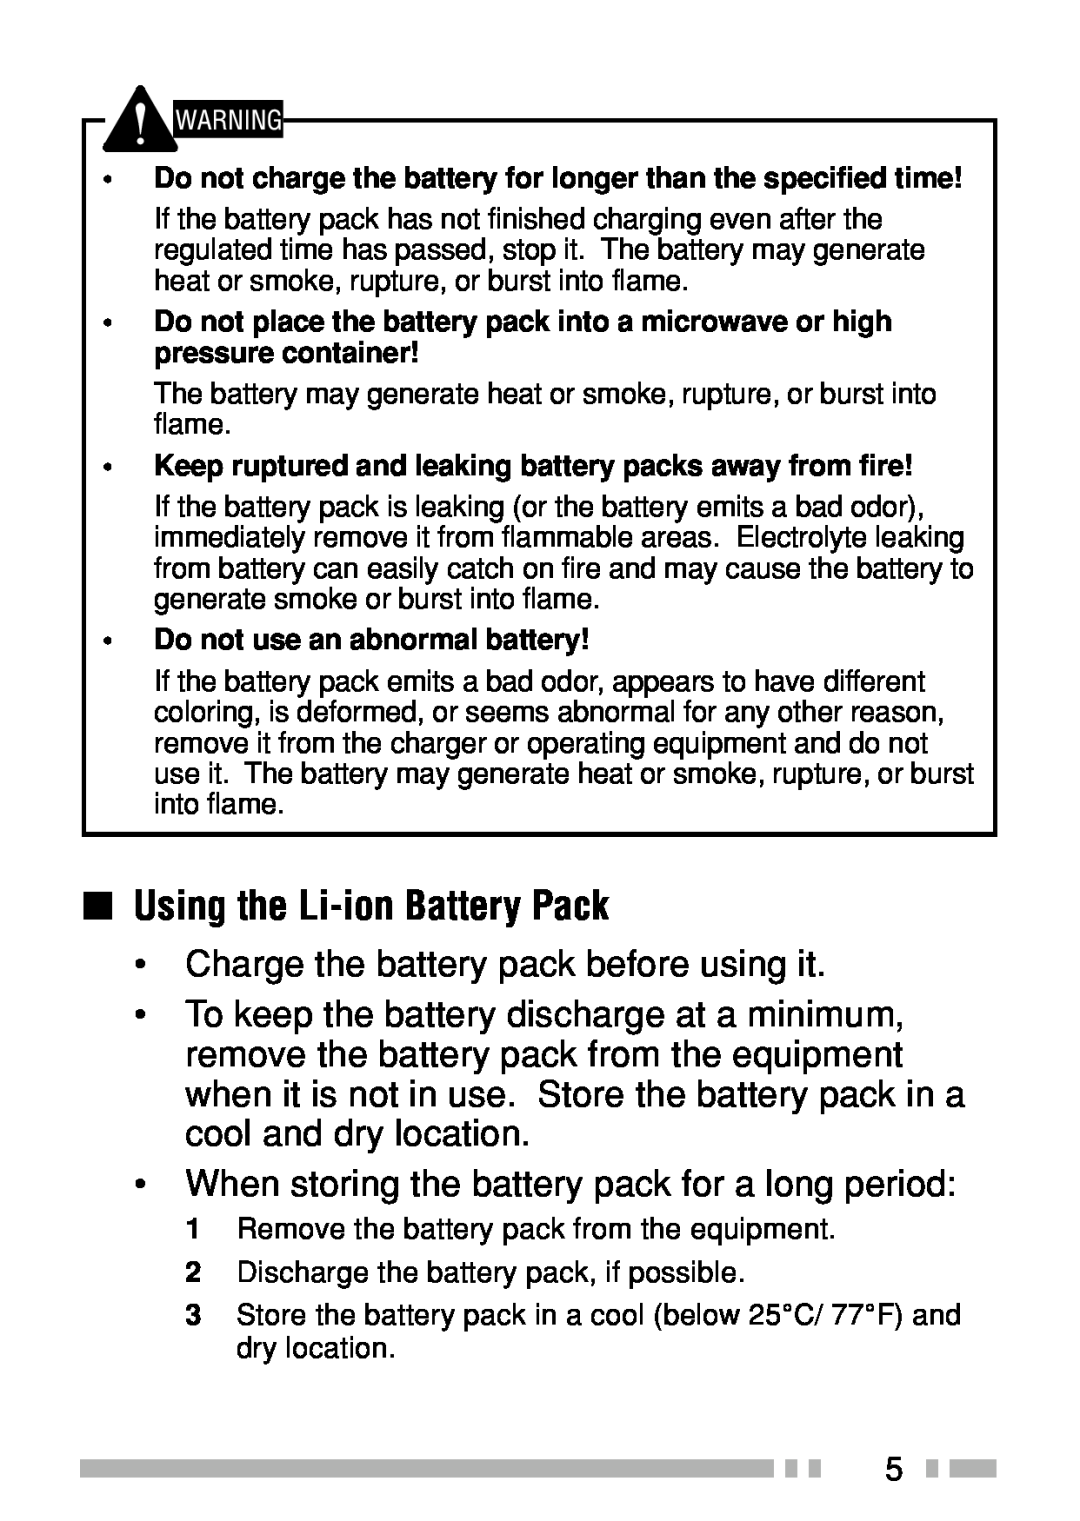 Kenwood TK-3160 Using the Li-ionBattery Pack, •Charge the battery pack before using it, •Do not use an abnormal battery 